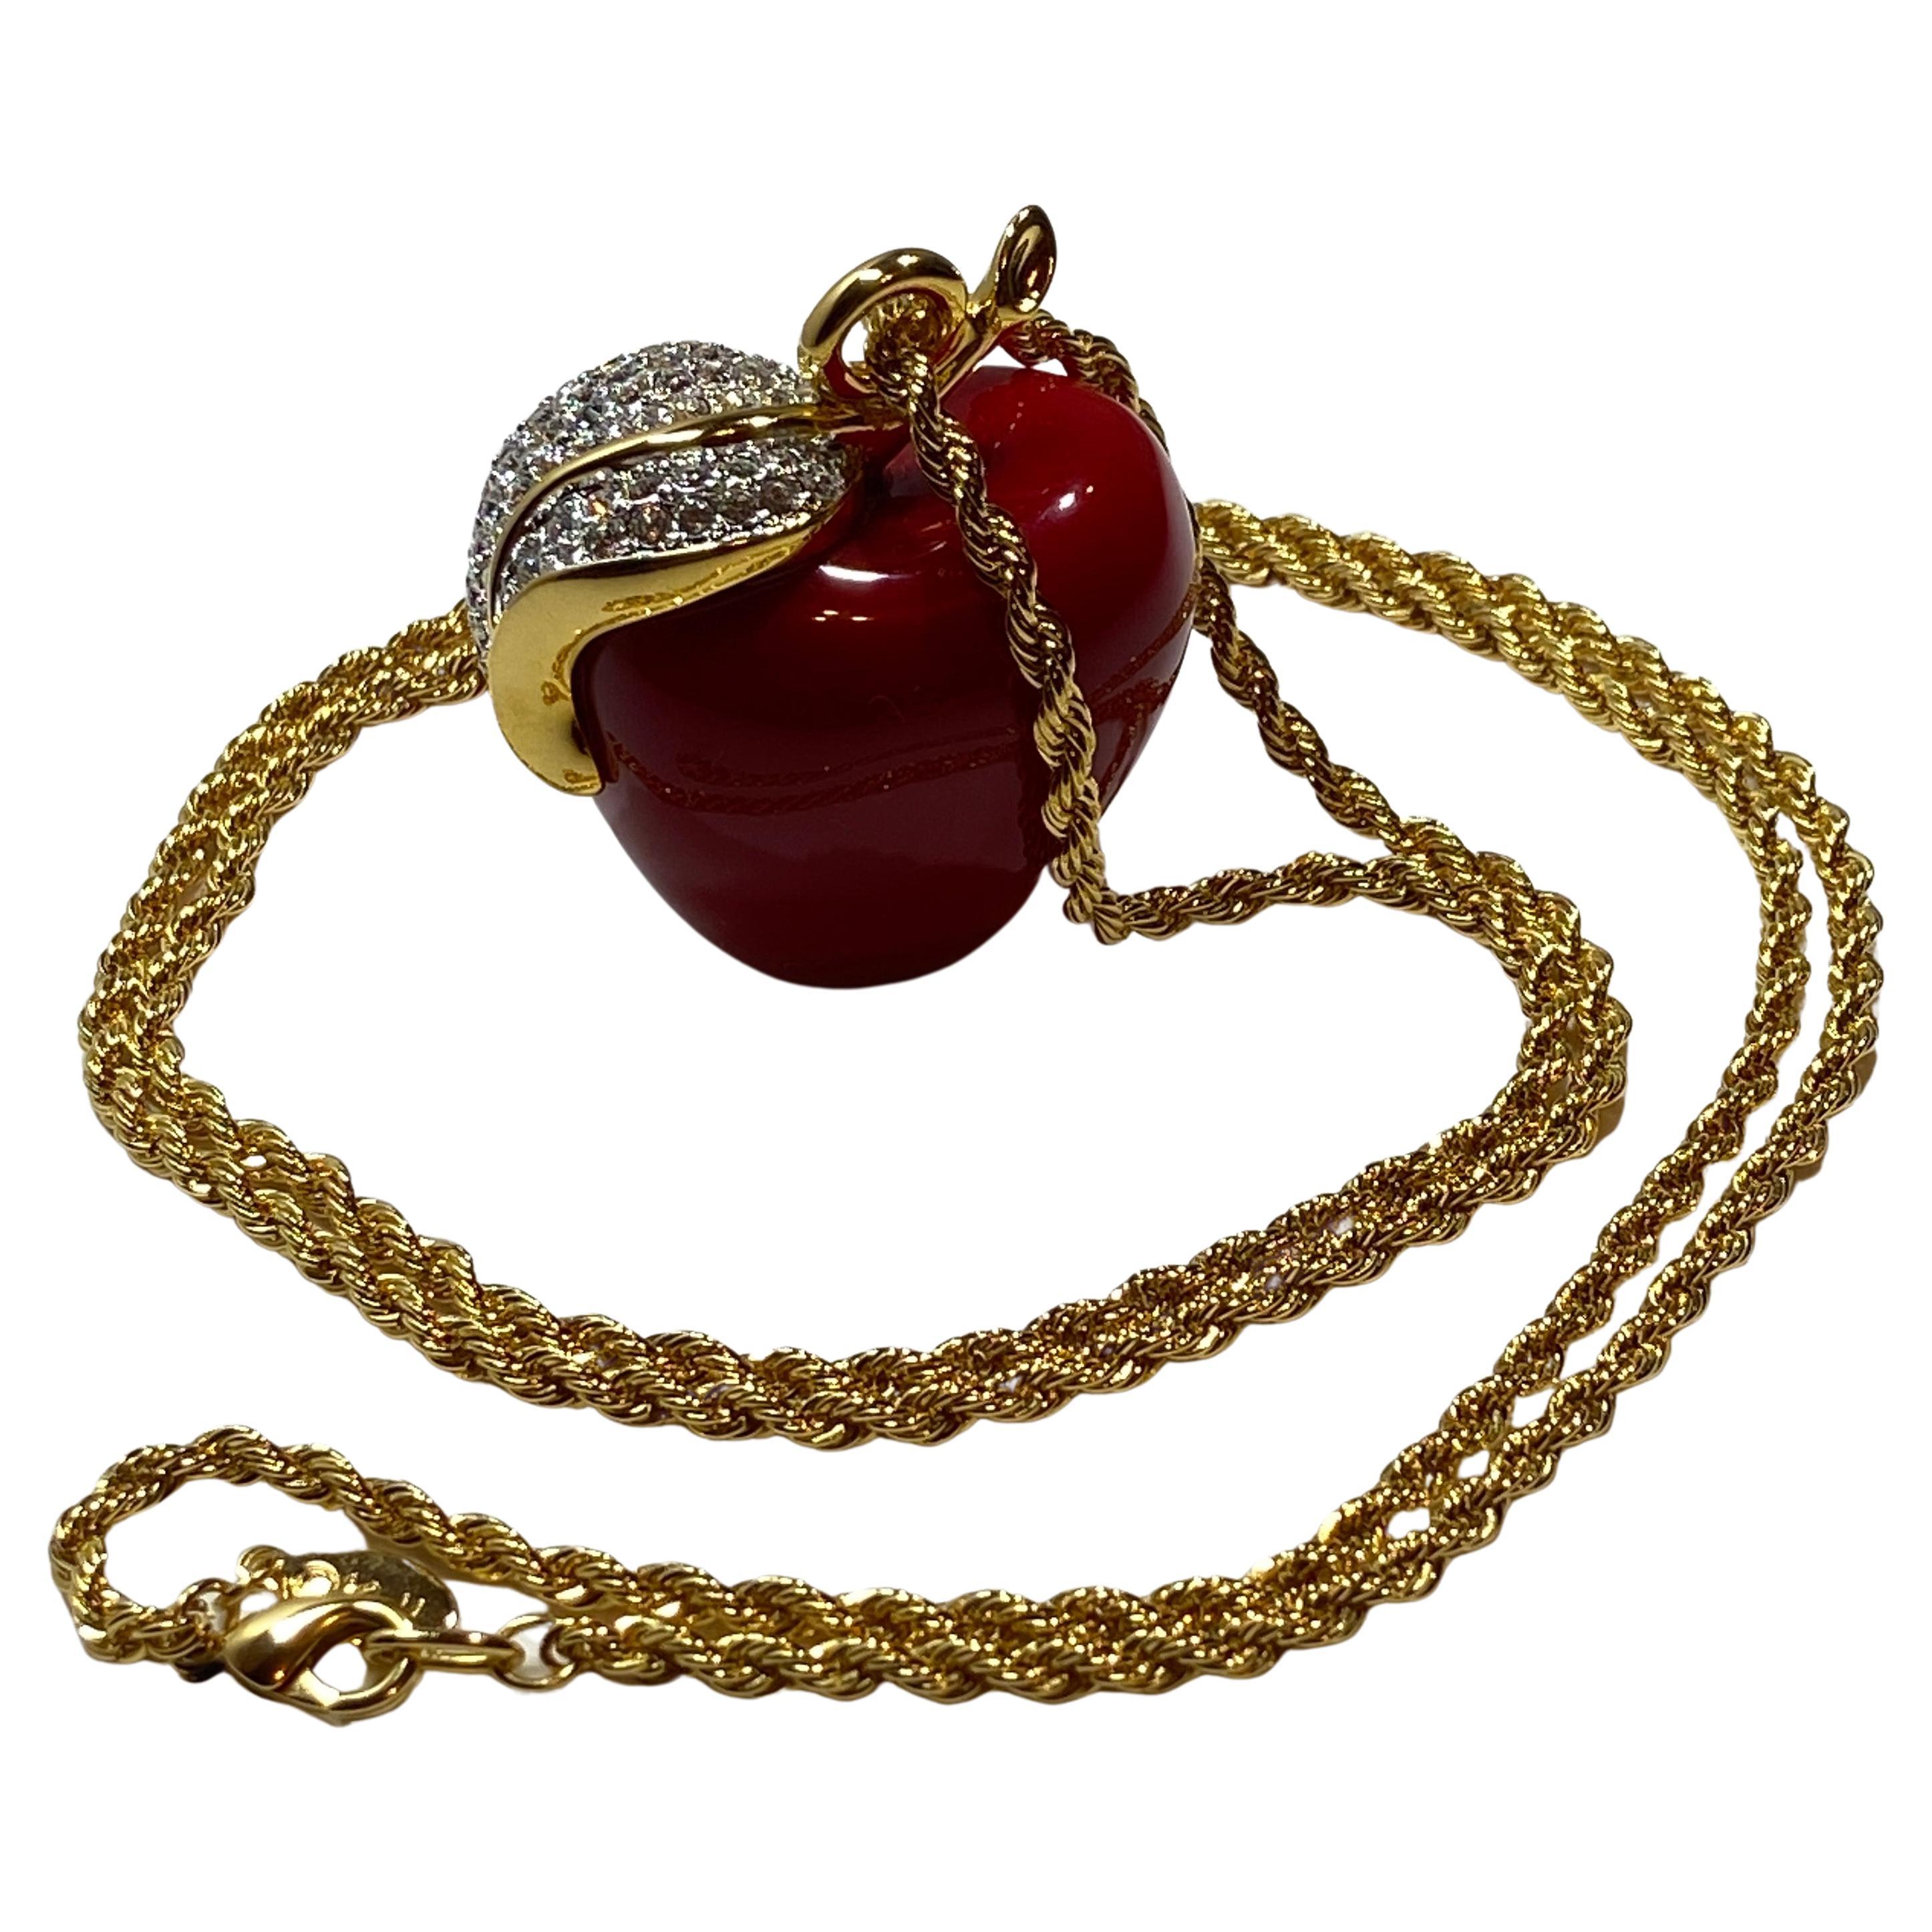 Kenneth Jay Lane Huge "Red Apple" With Rhinestones Pendant & Necklace For Sale